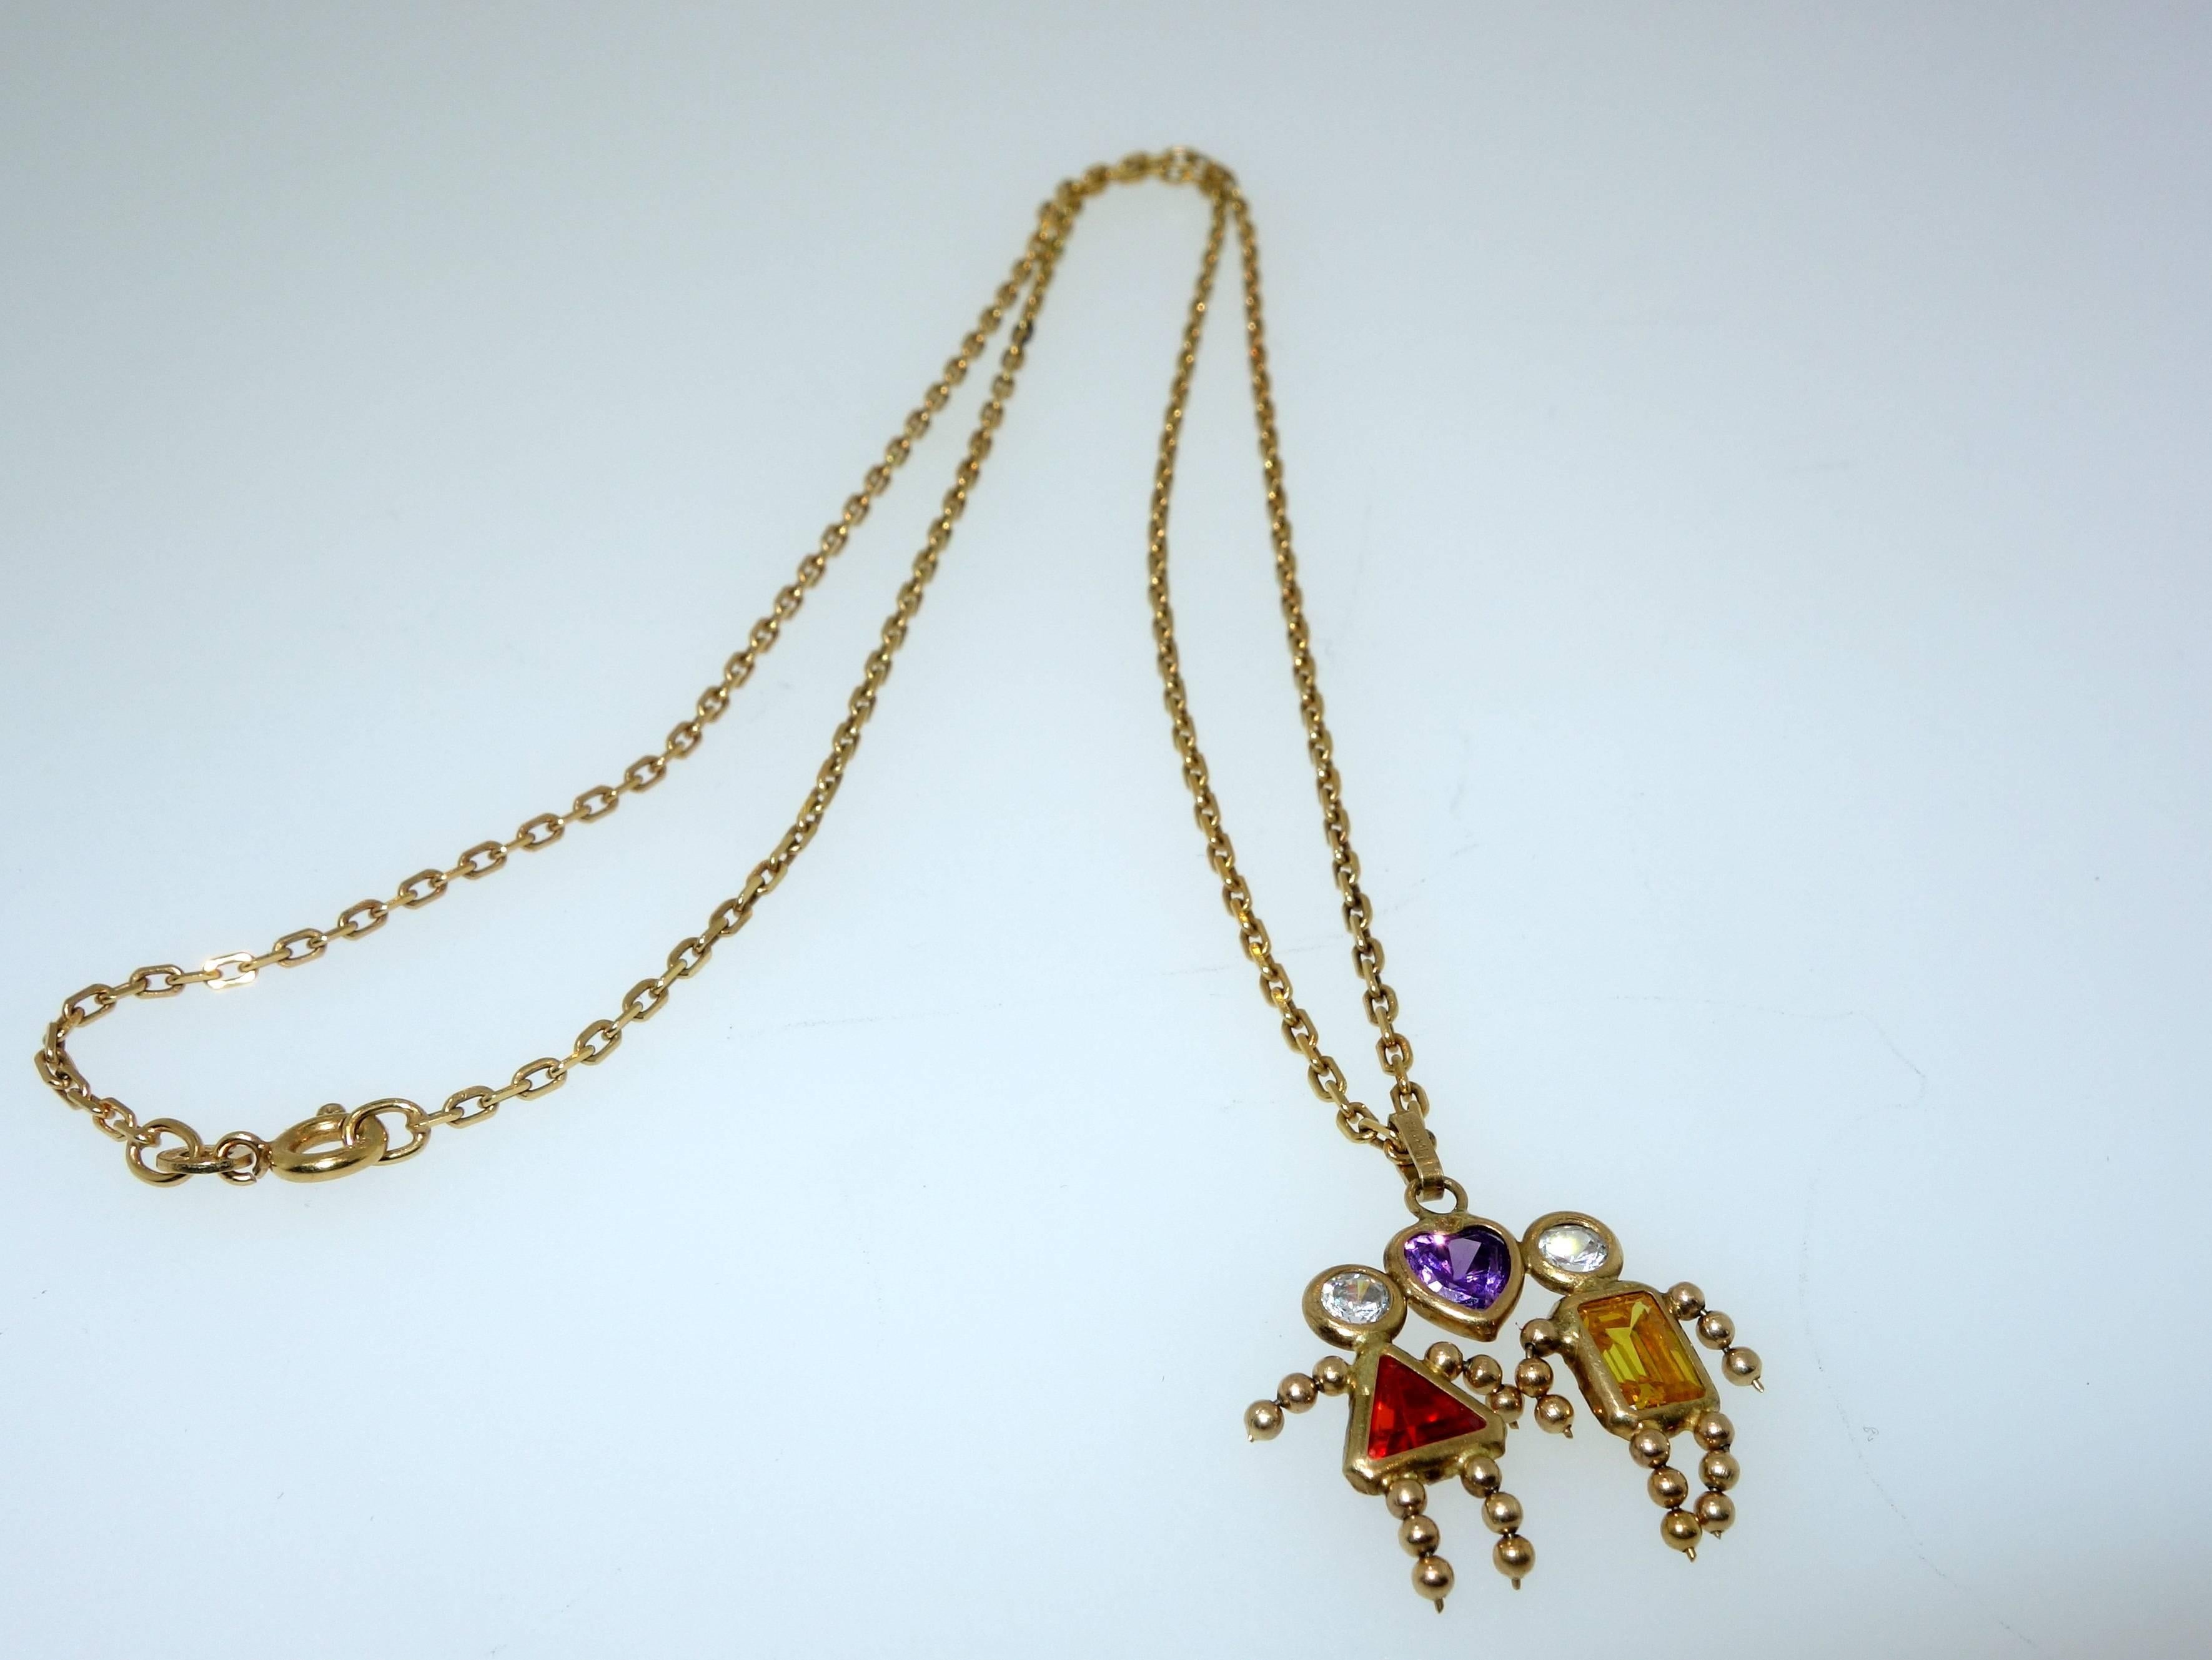 Charming charm necklace in 14K gold, the gold charm hanging from the 14K chain, which is 20 inches long and with the 1 inch charm creates a 21 inch long pendant necklace.  The charm's stones are synthetic which makes this romantic and colorful piece